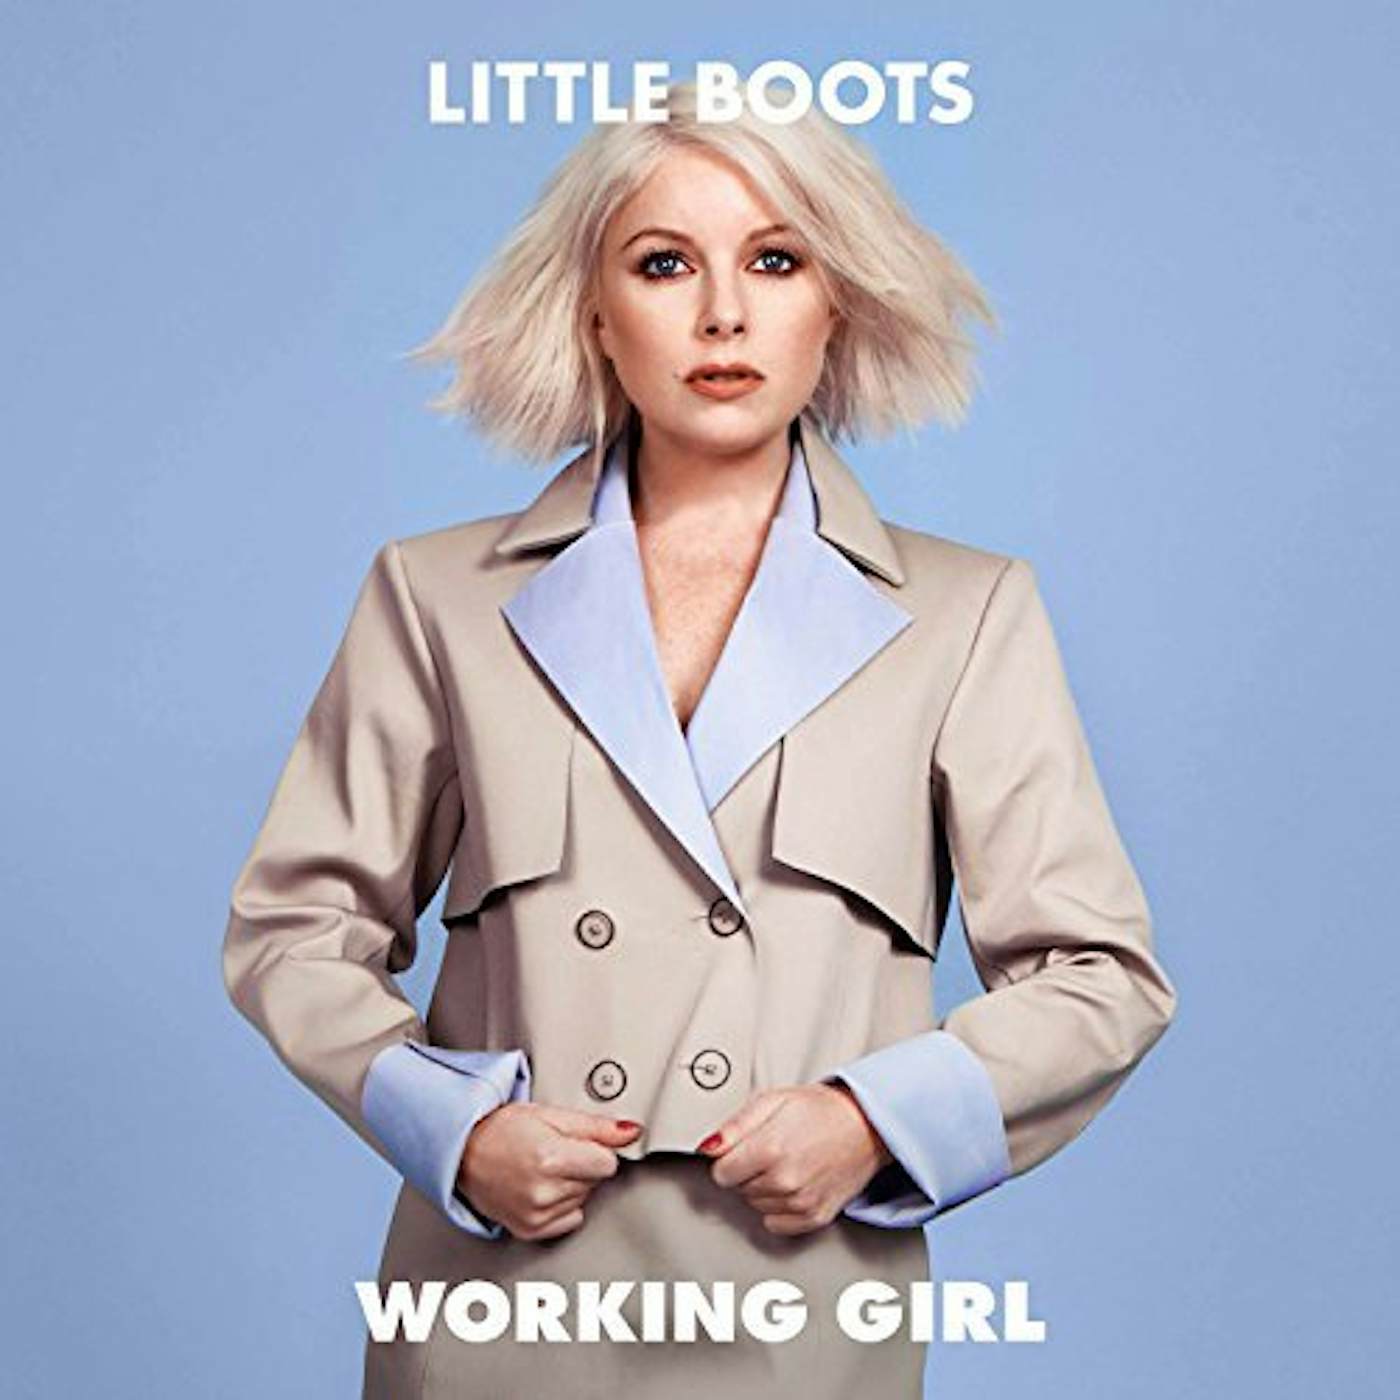 Little Boots Working Girl Vinyl Record